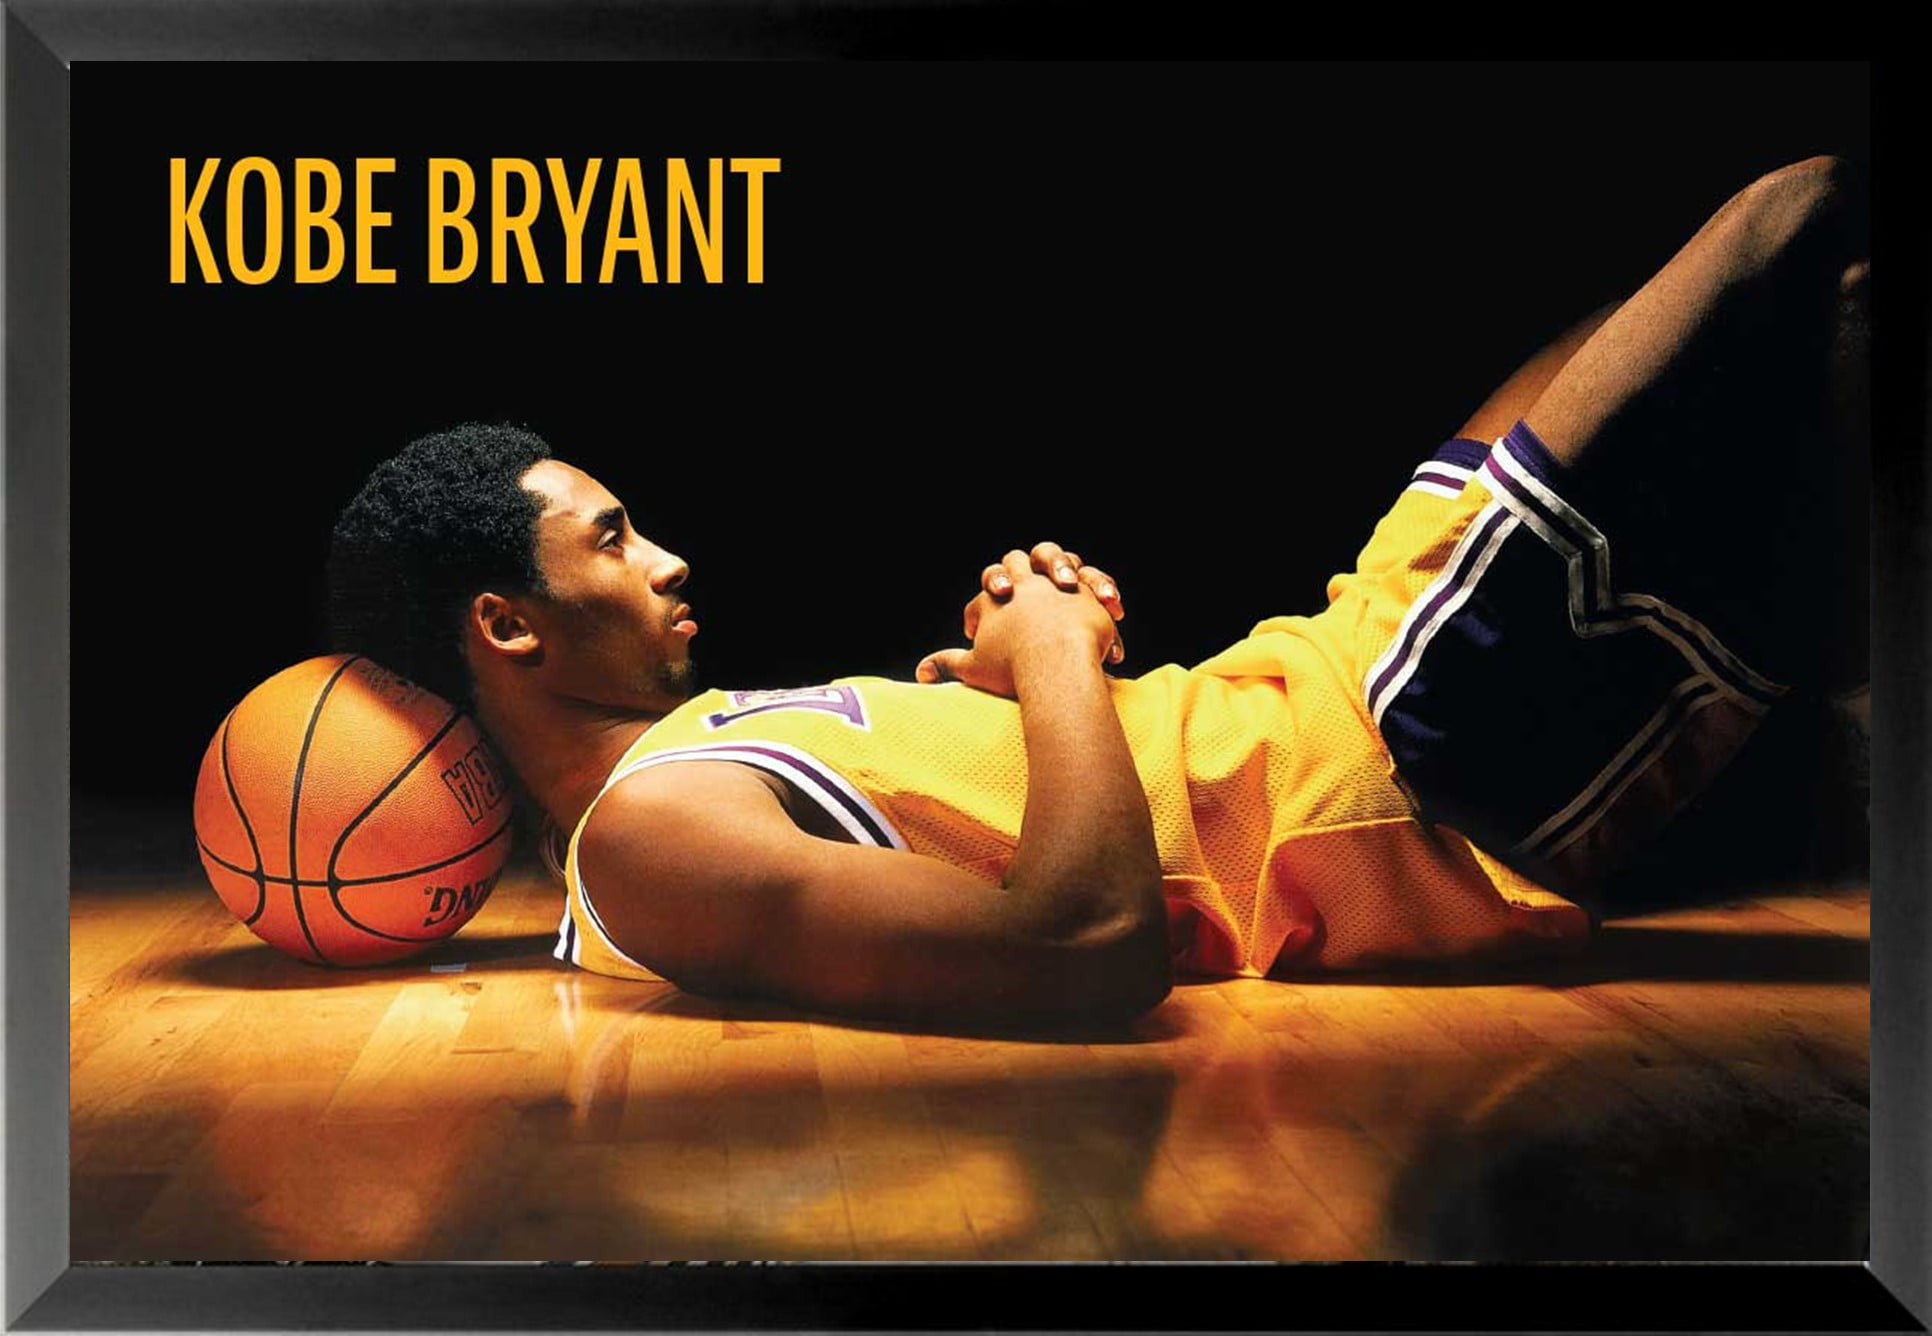 Kobe Bryant limited edition color prints on matted paper and stretched canvas FREE shipping